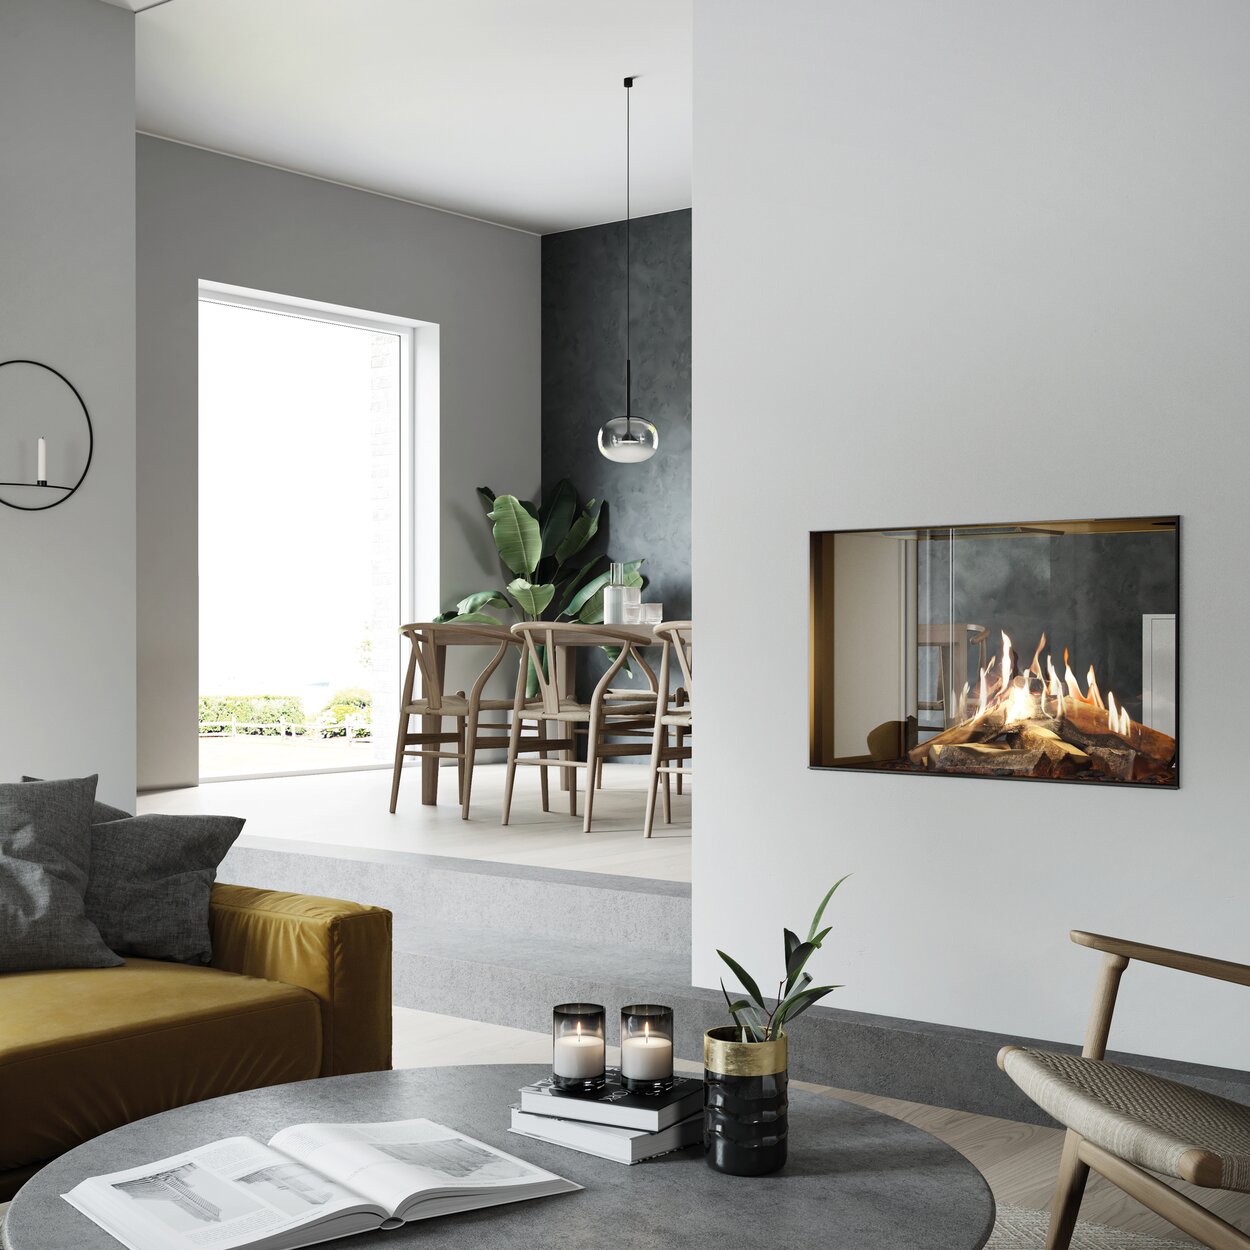 VISIO 90 T gas fireplace is located in the centre of the brightly furnished room, yet still provides a tunnel-like view from the living room to the dining room and kitchen